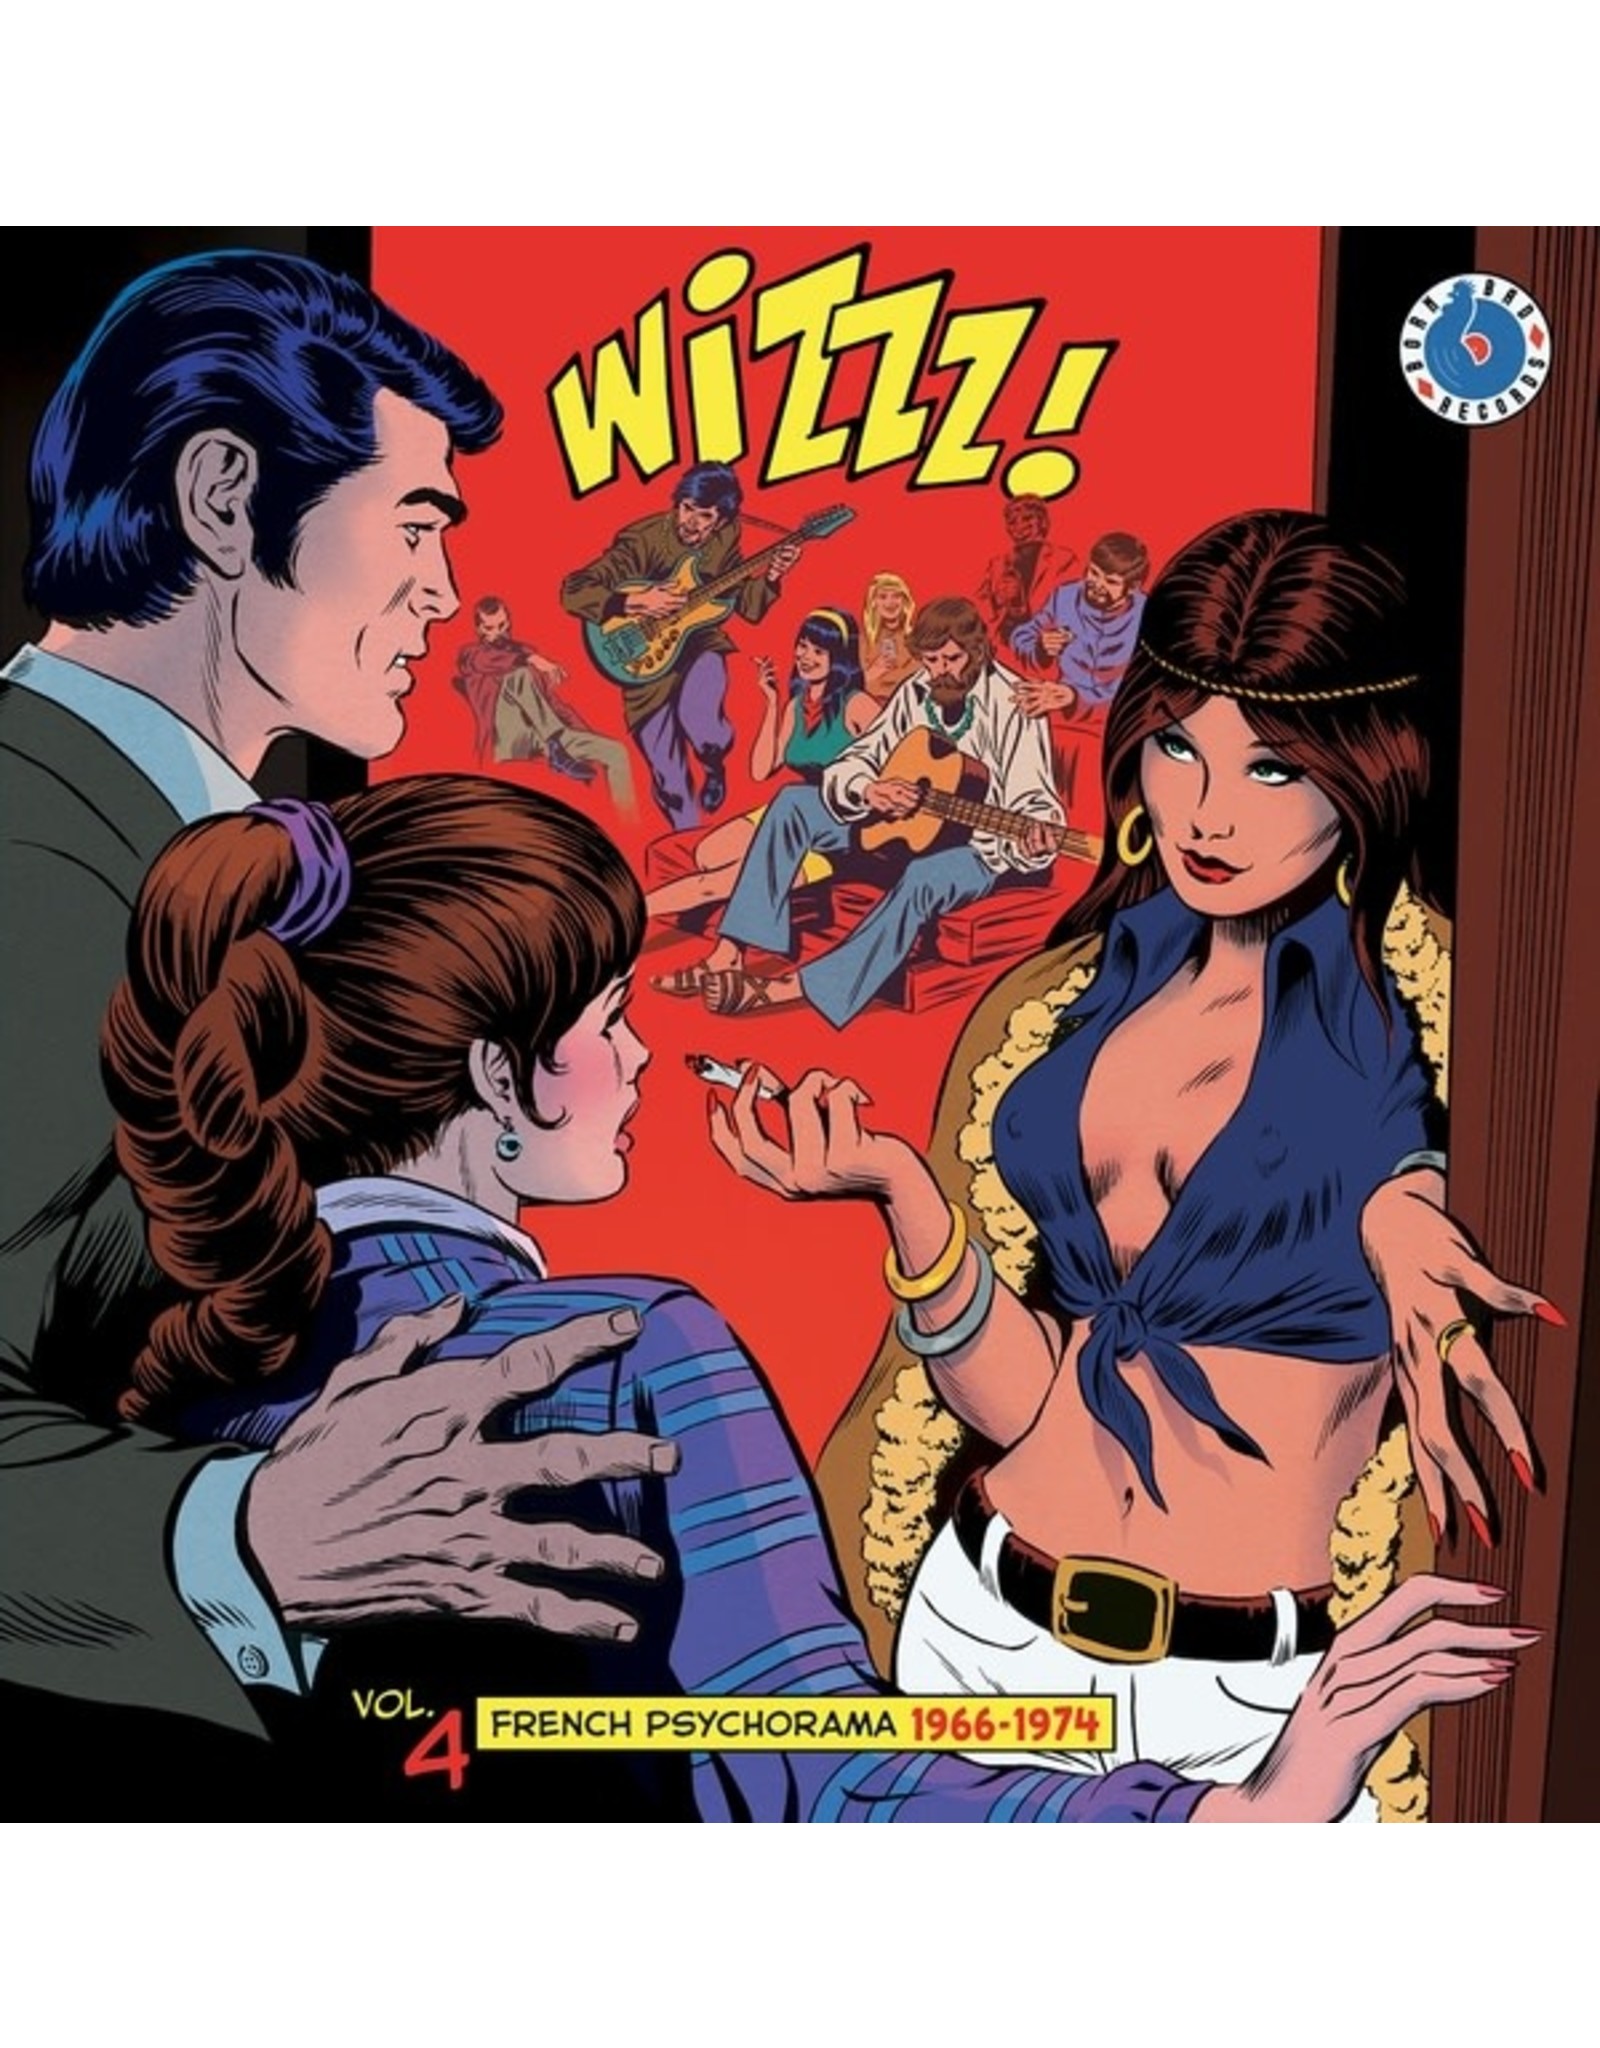 Born Bad Various: Wizzz! French Psychorama 1964-1974 V4 LP